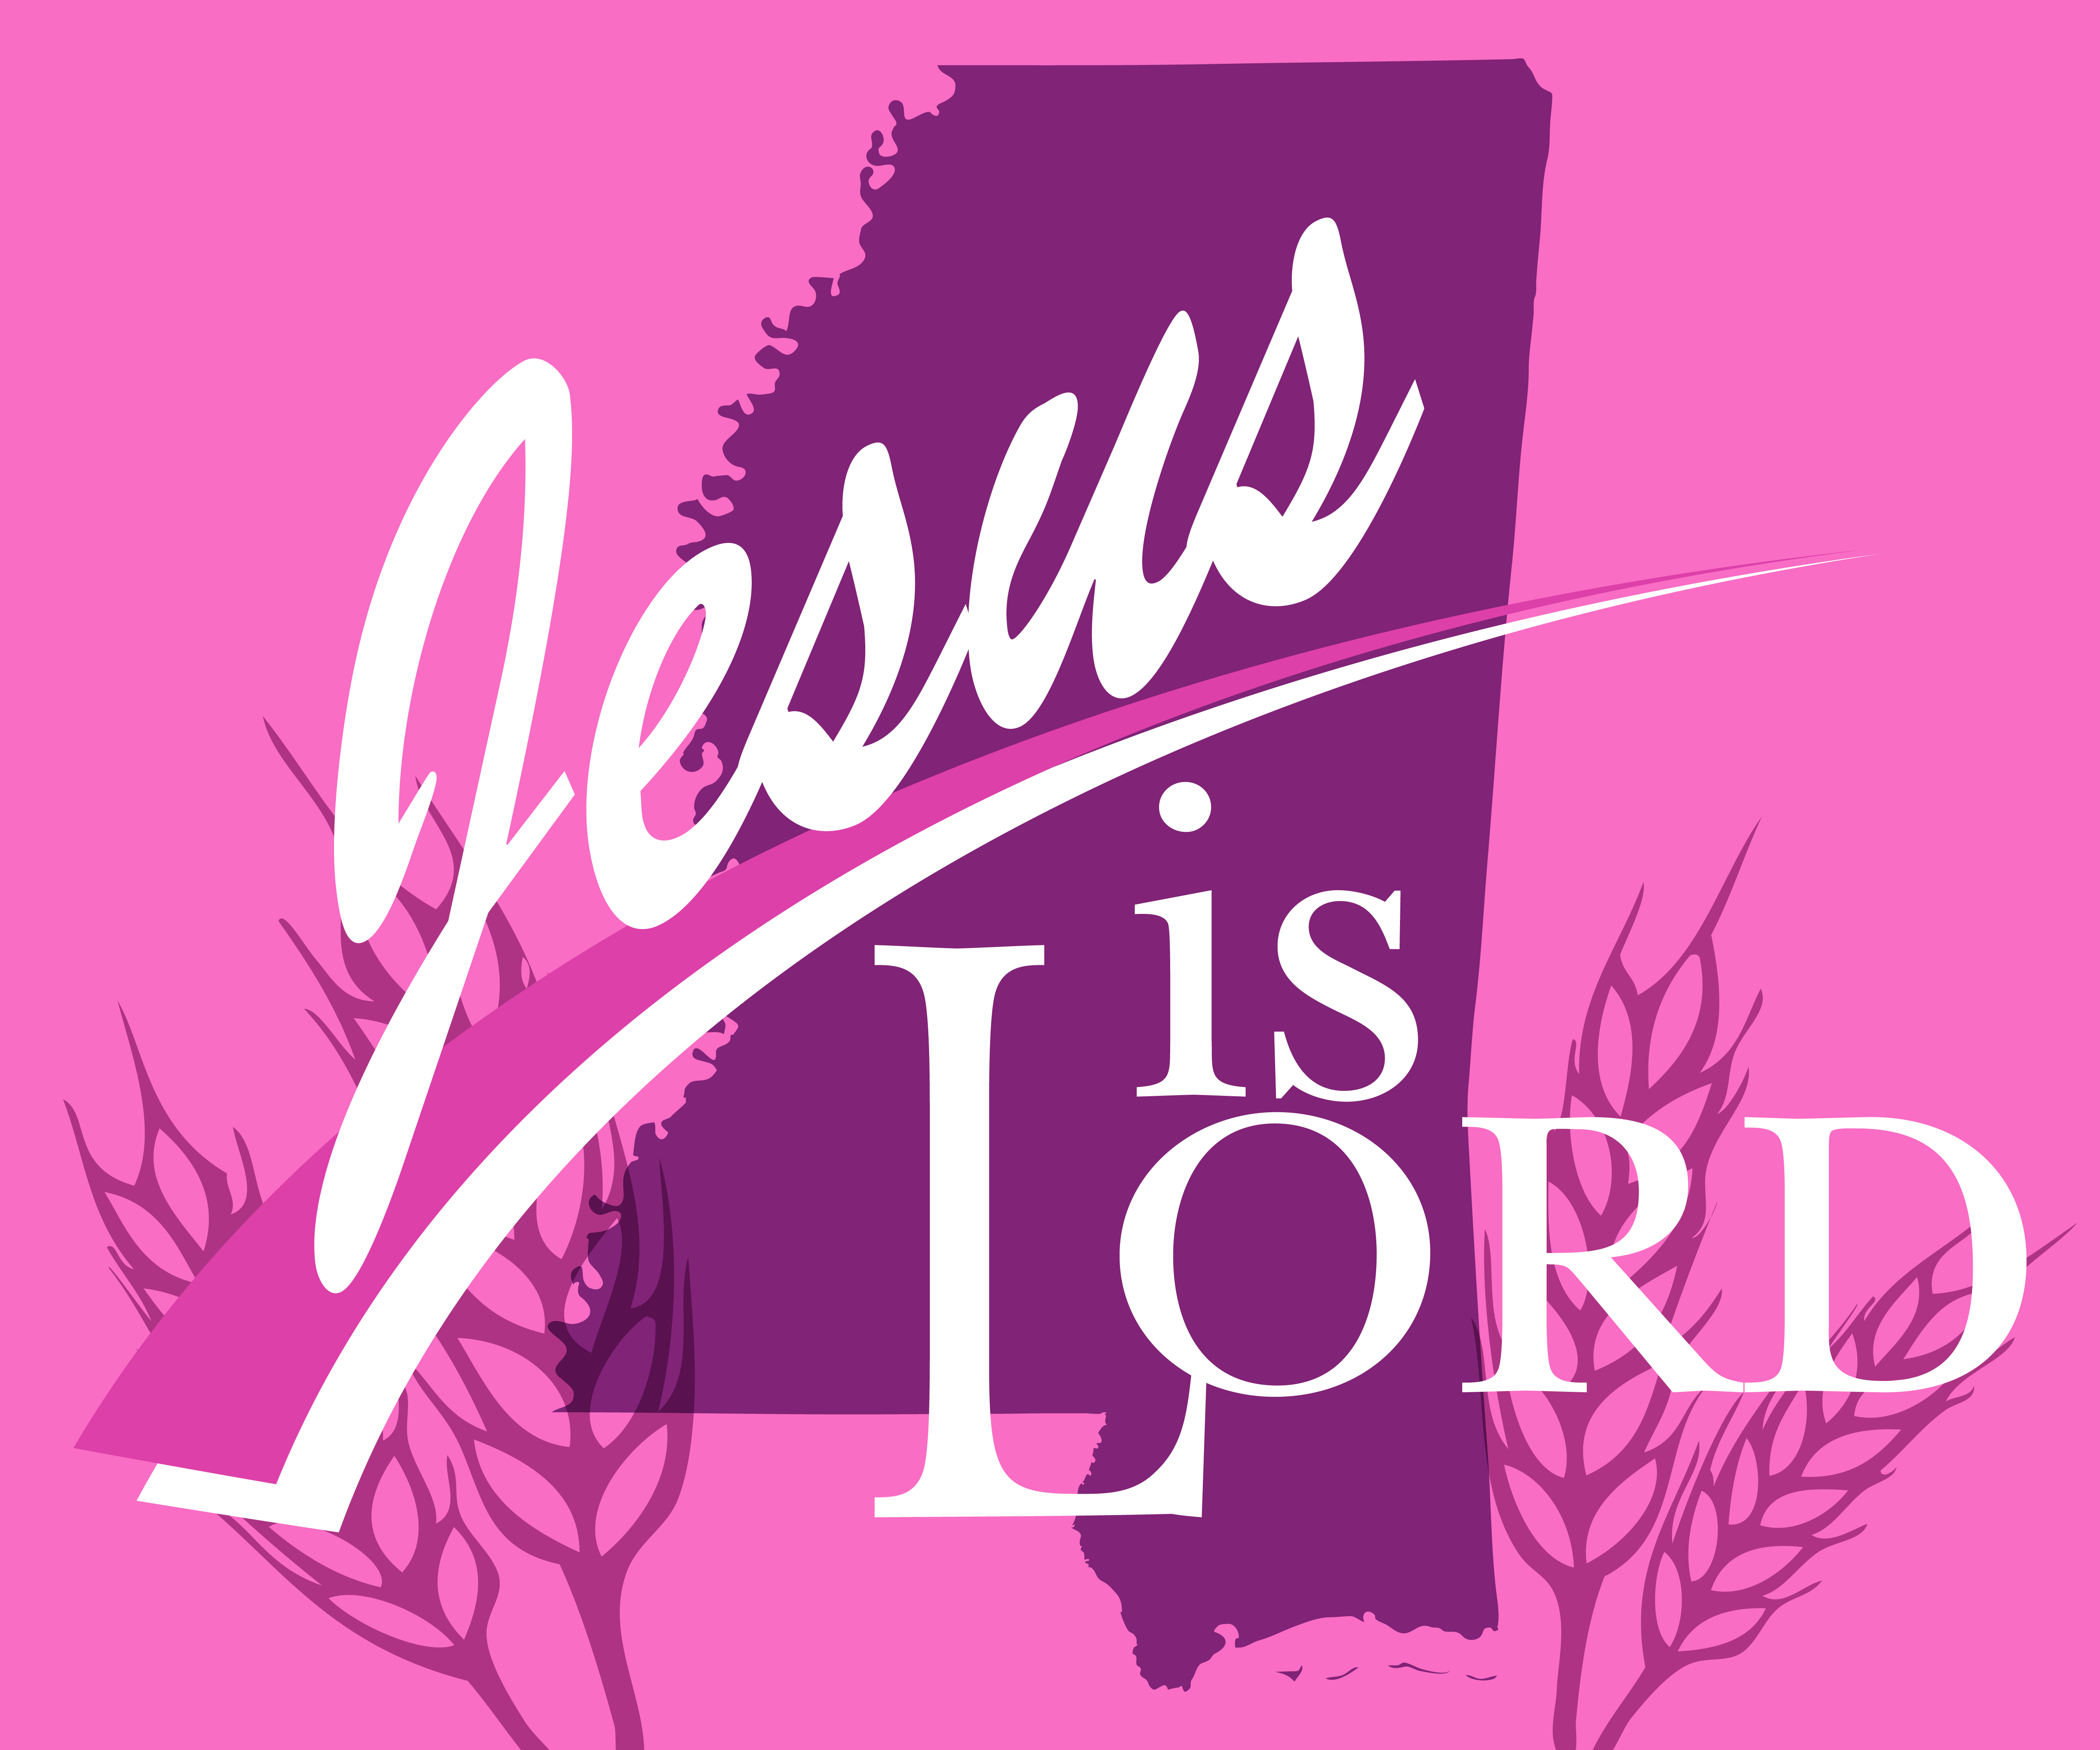 Jesus is Lord over Mississippi!